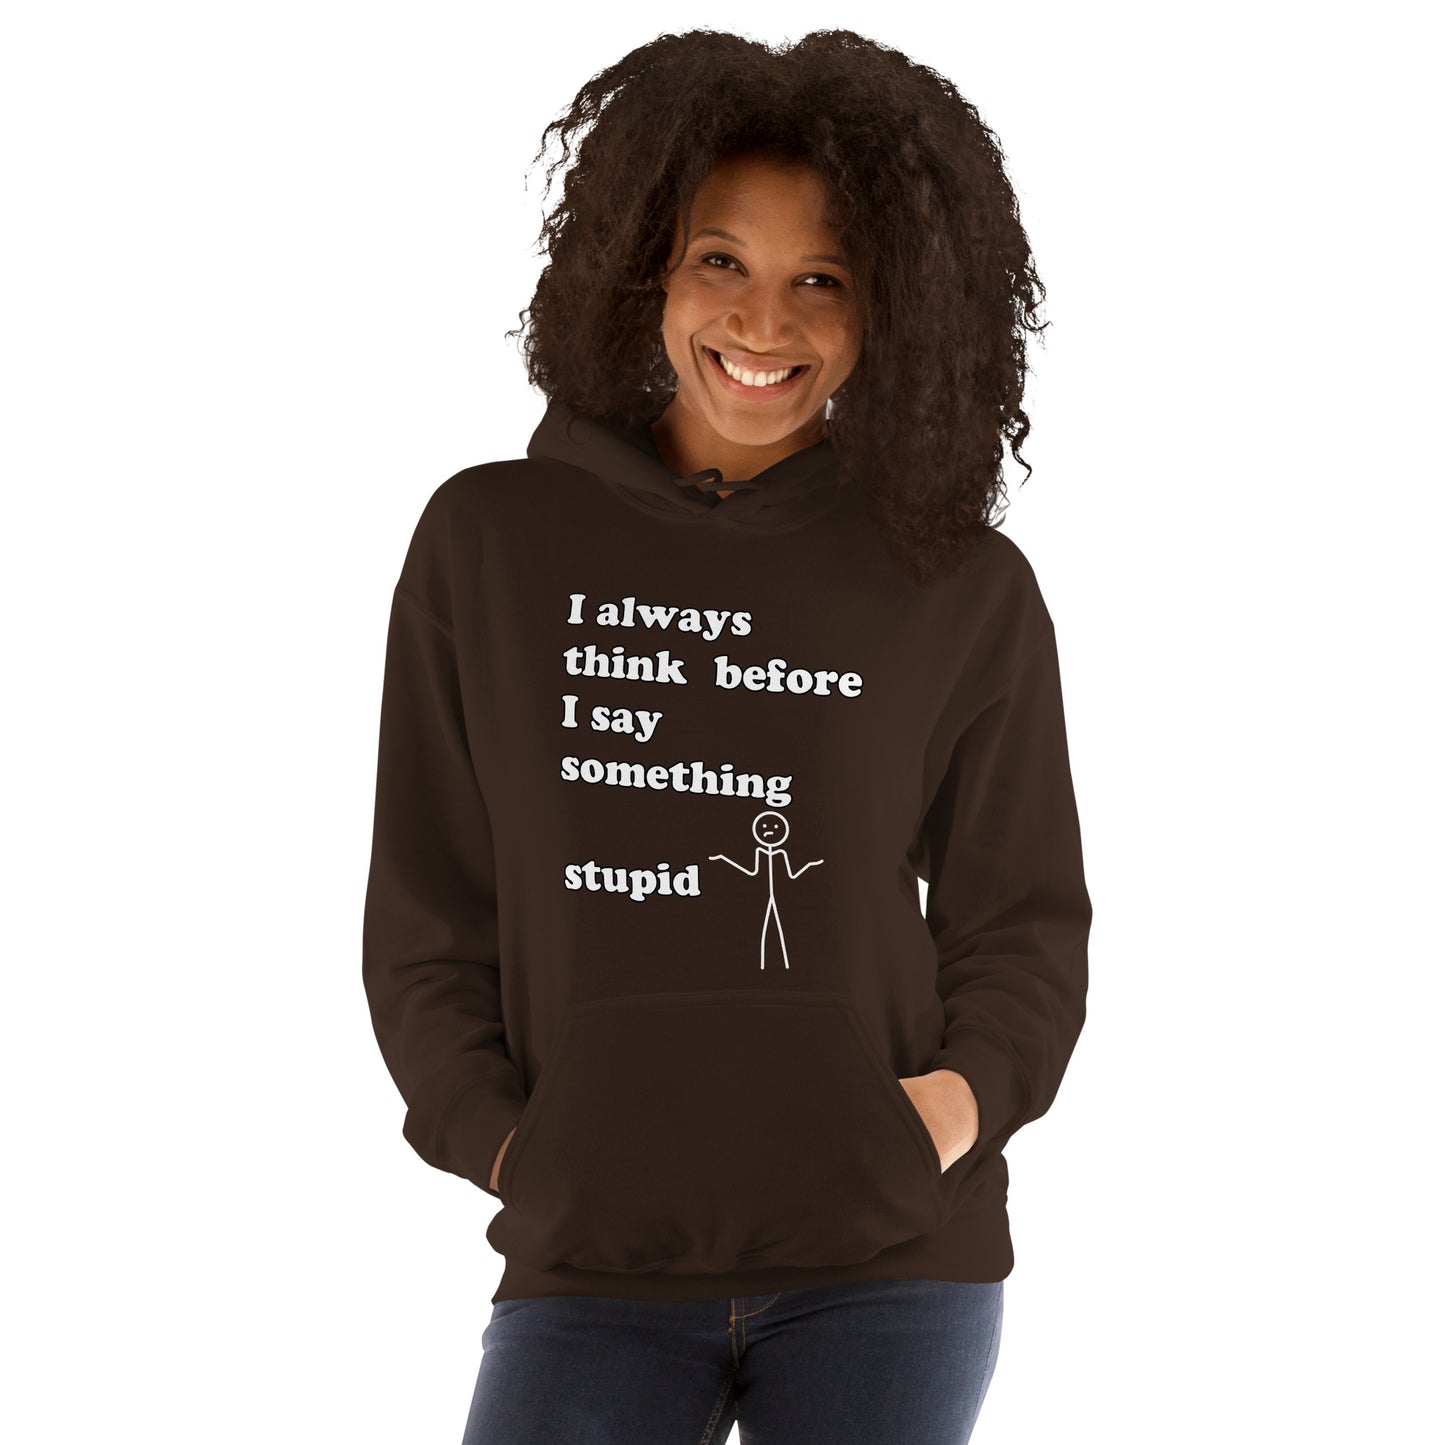 Woman with brown hoodie with text "I always think before I say something stupid"